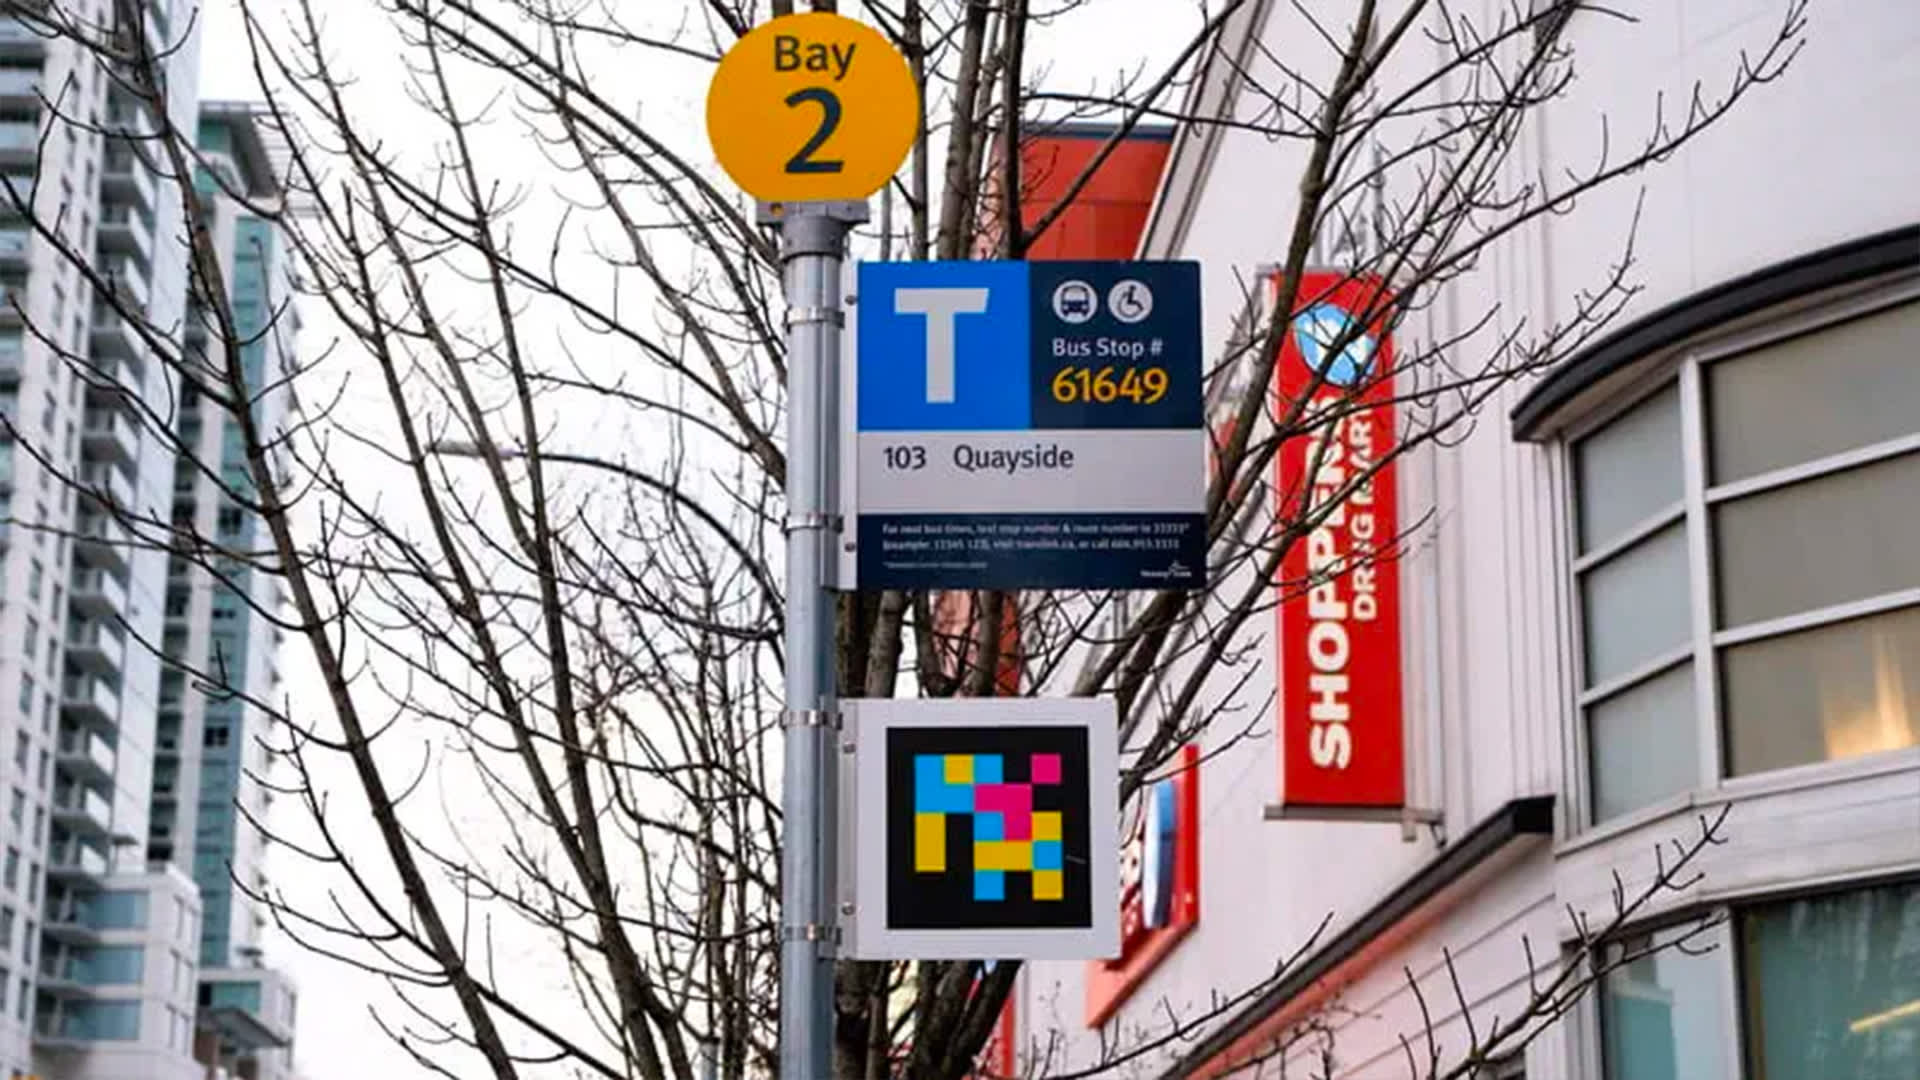 NaviLens code decal on a bus stop sign at a bus station in New Westminster, British Columbia (Image credit: Translink)